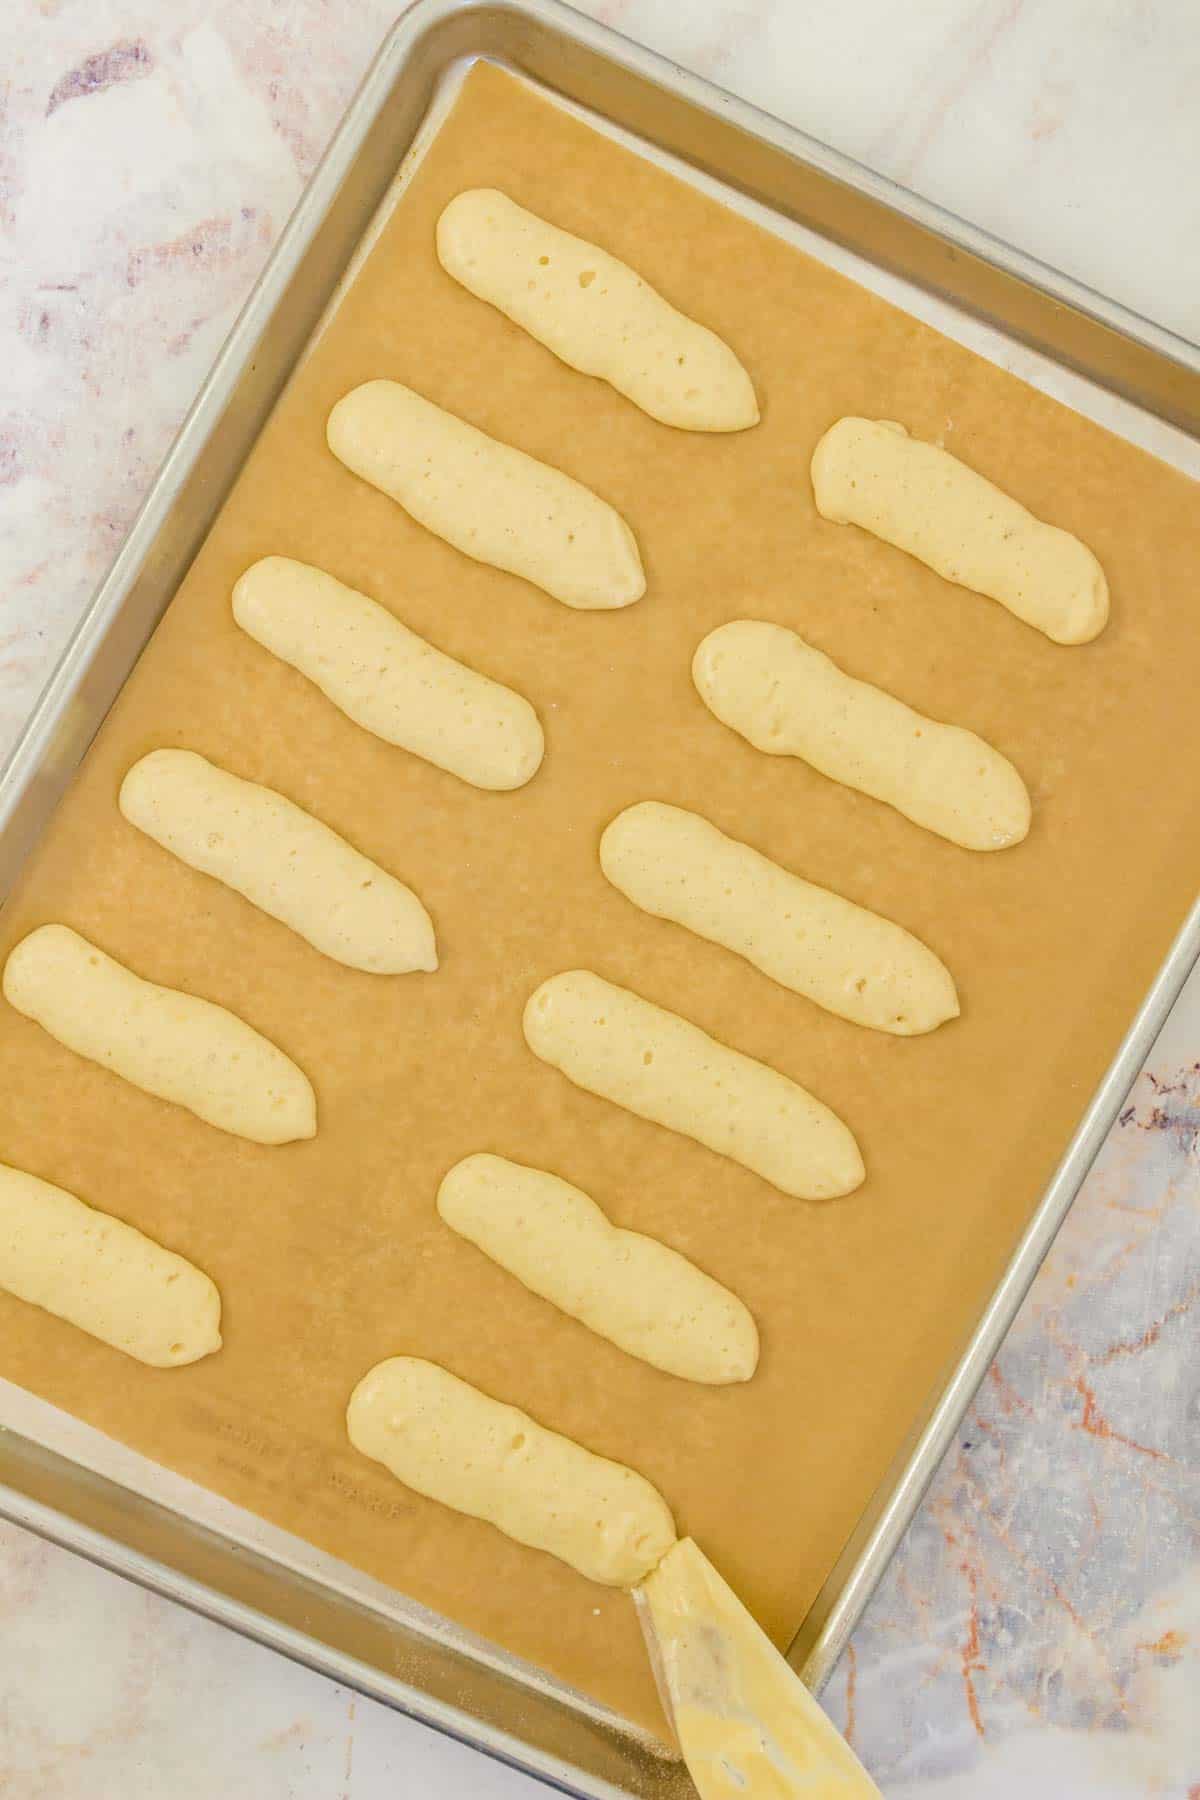 A piping bag is used to pipe lines of ladyfinger batter onto a parchment lined baking sheet.